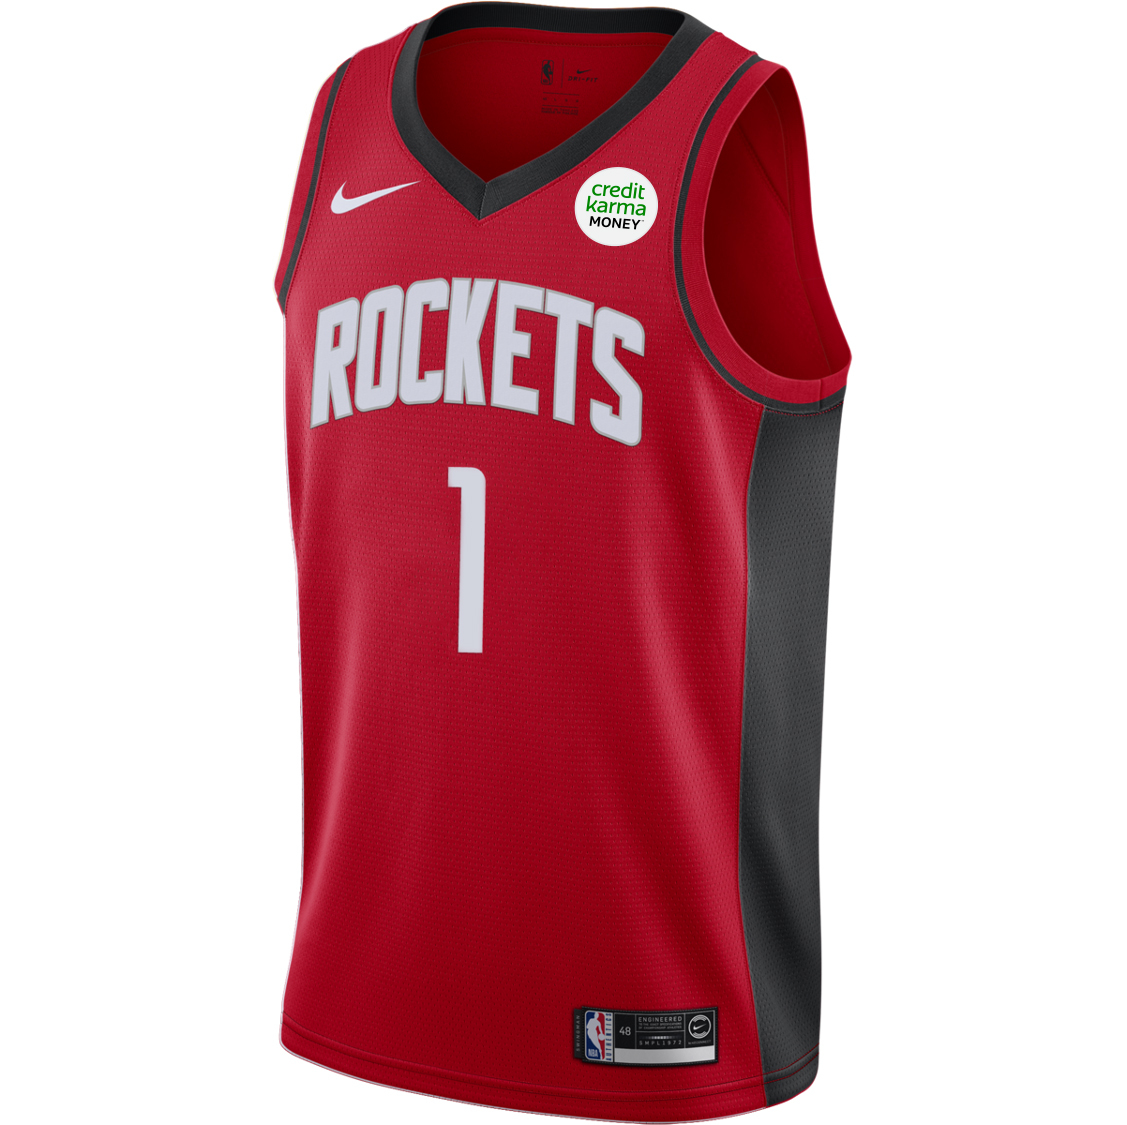 Rockets announce jersey patch sponsorship with Credit Karma Money